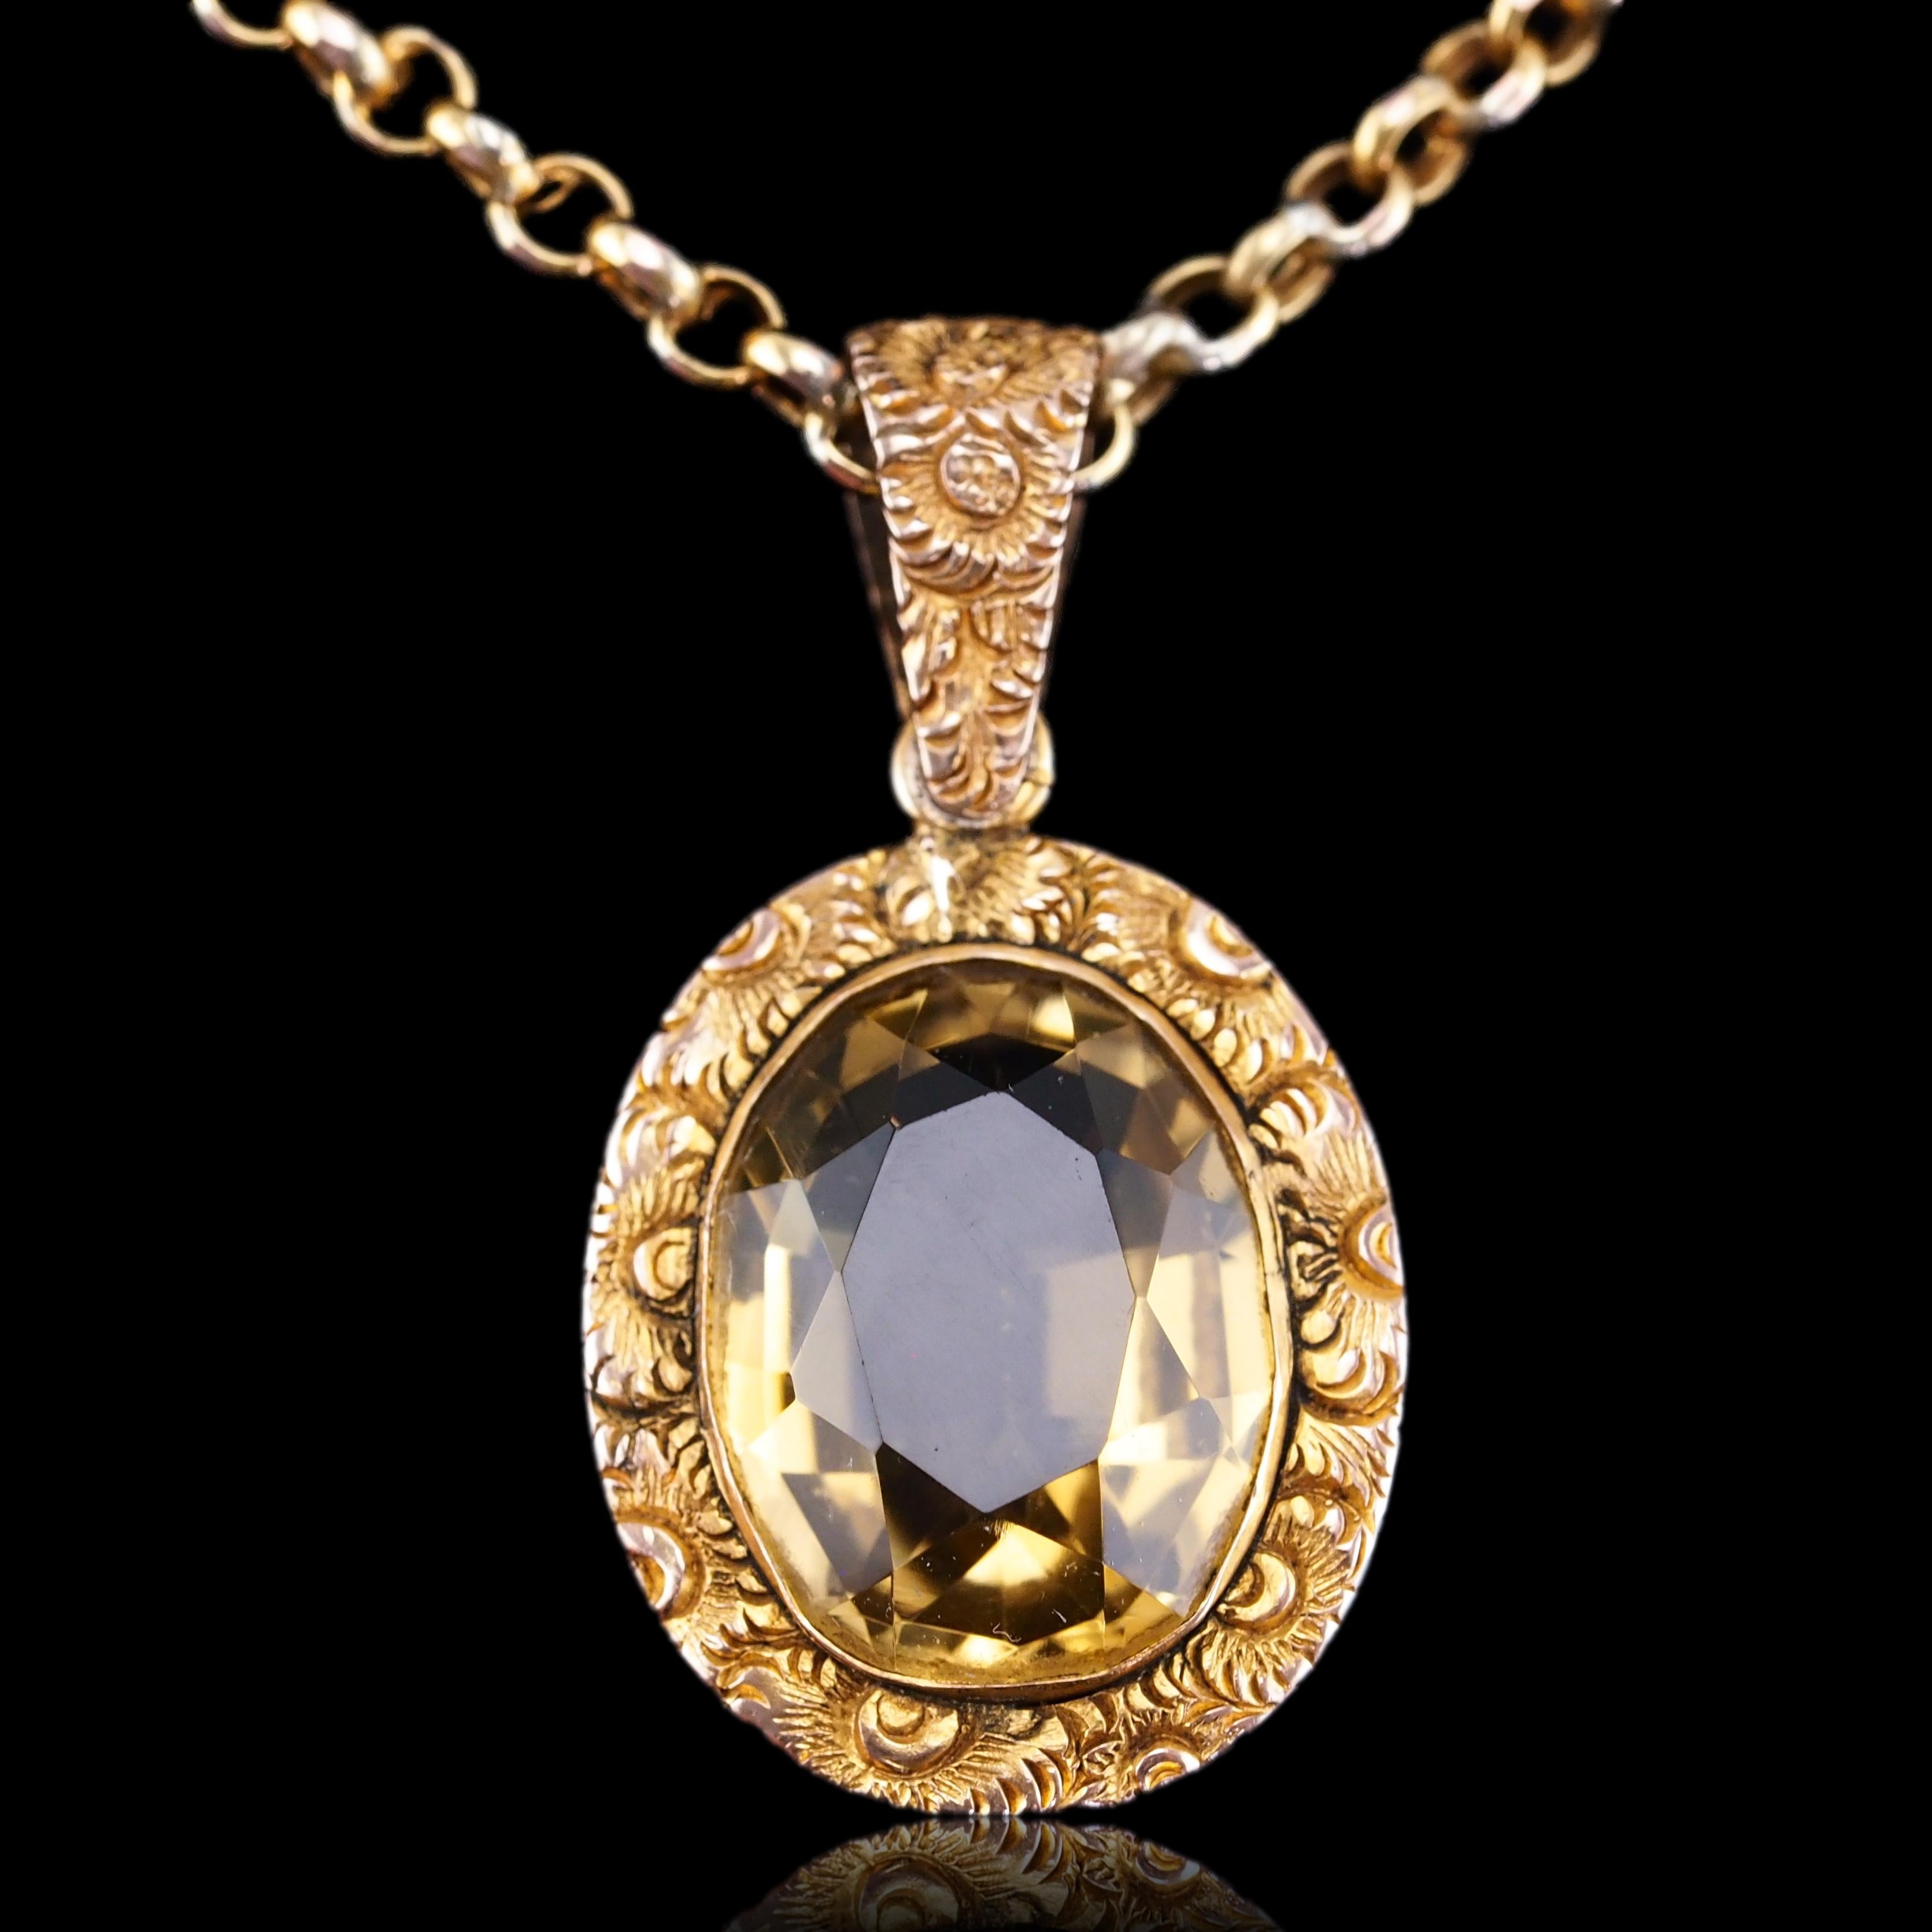 Antique Victorian Citrine Necklace with Chased Floral Pendant 9K Gold c.1850 11